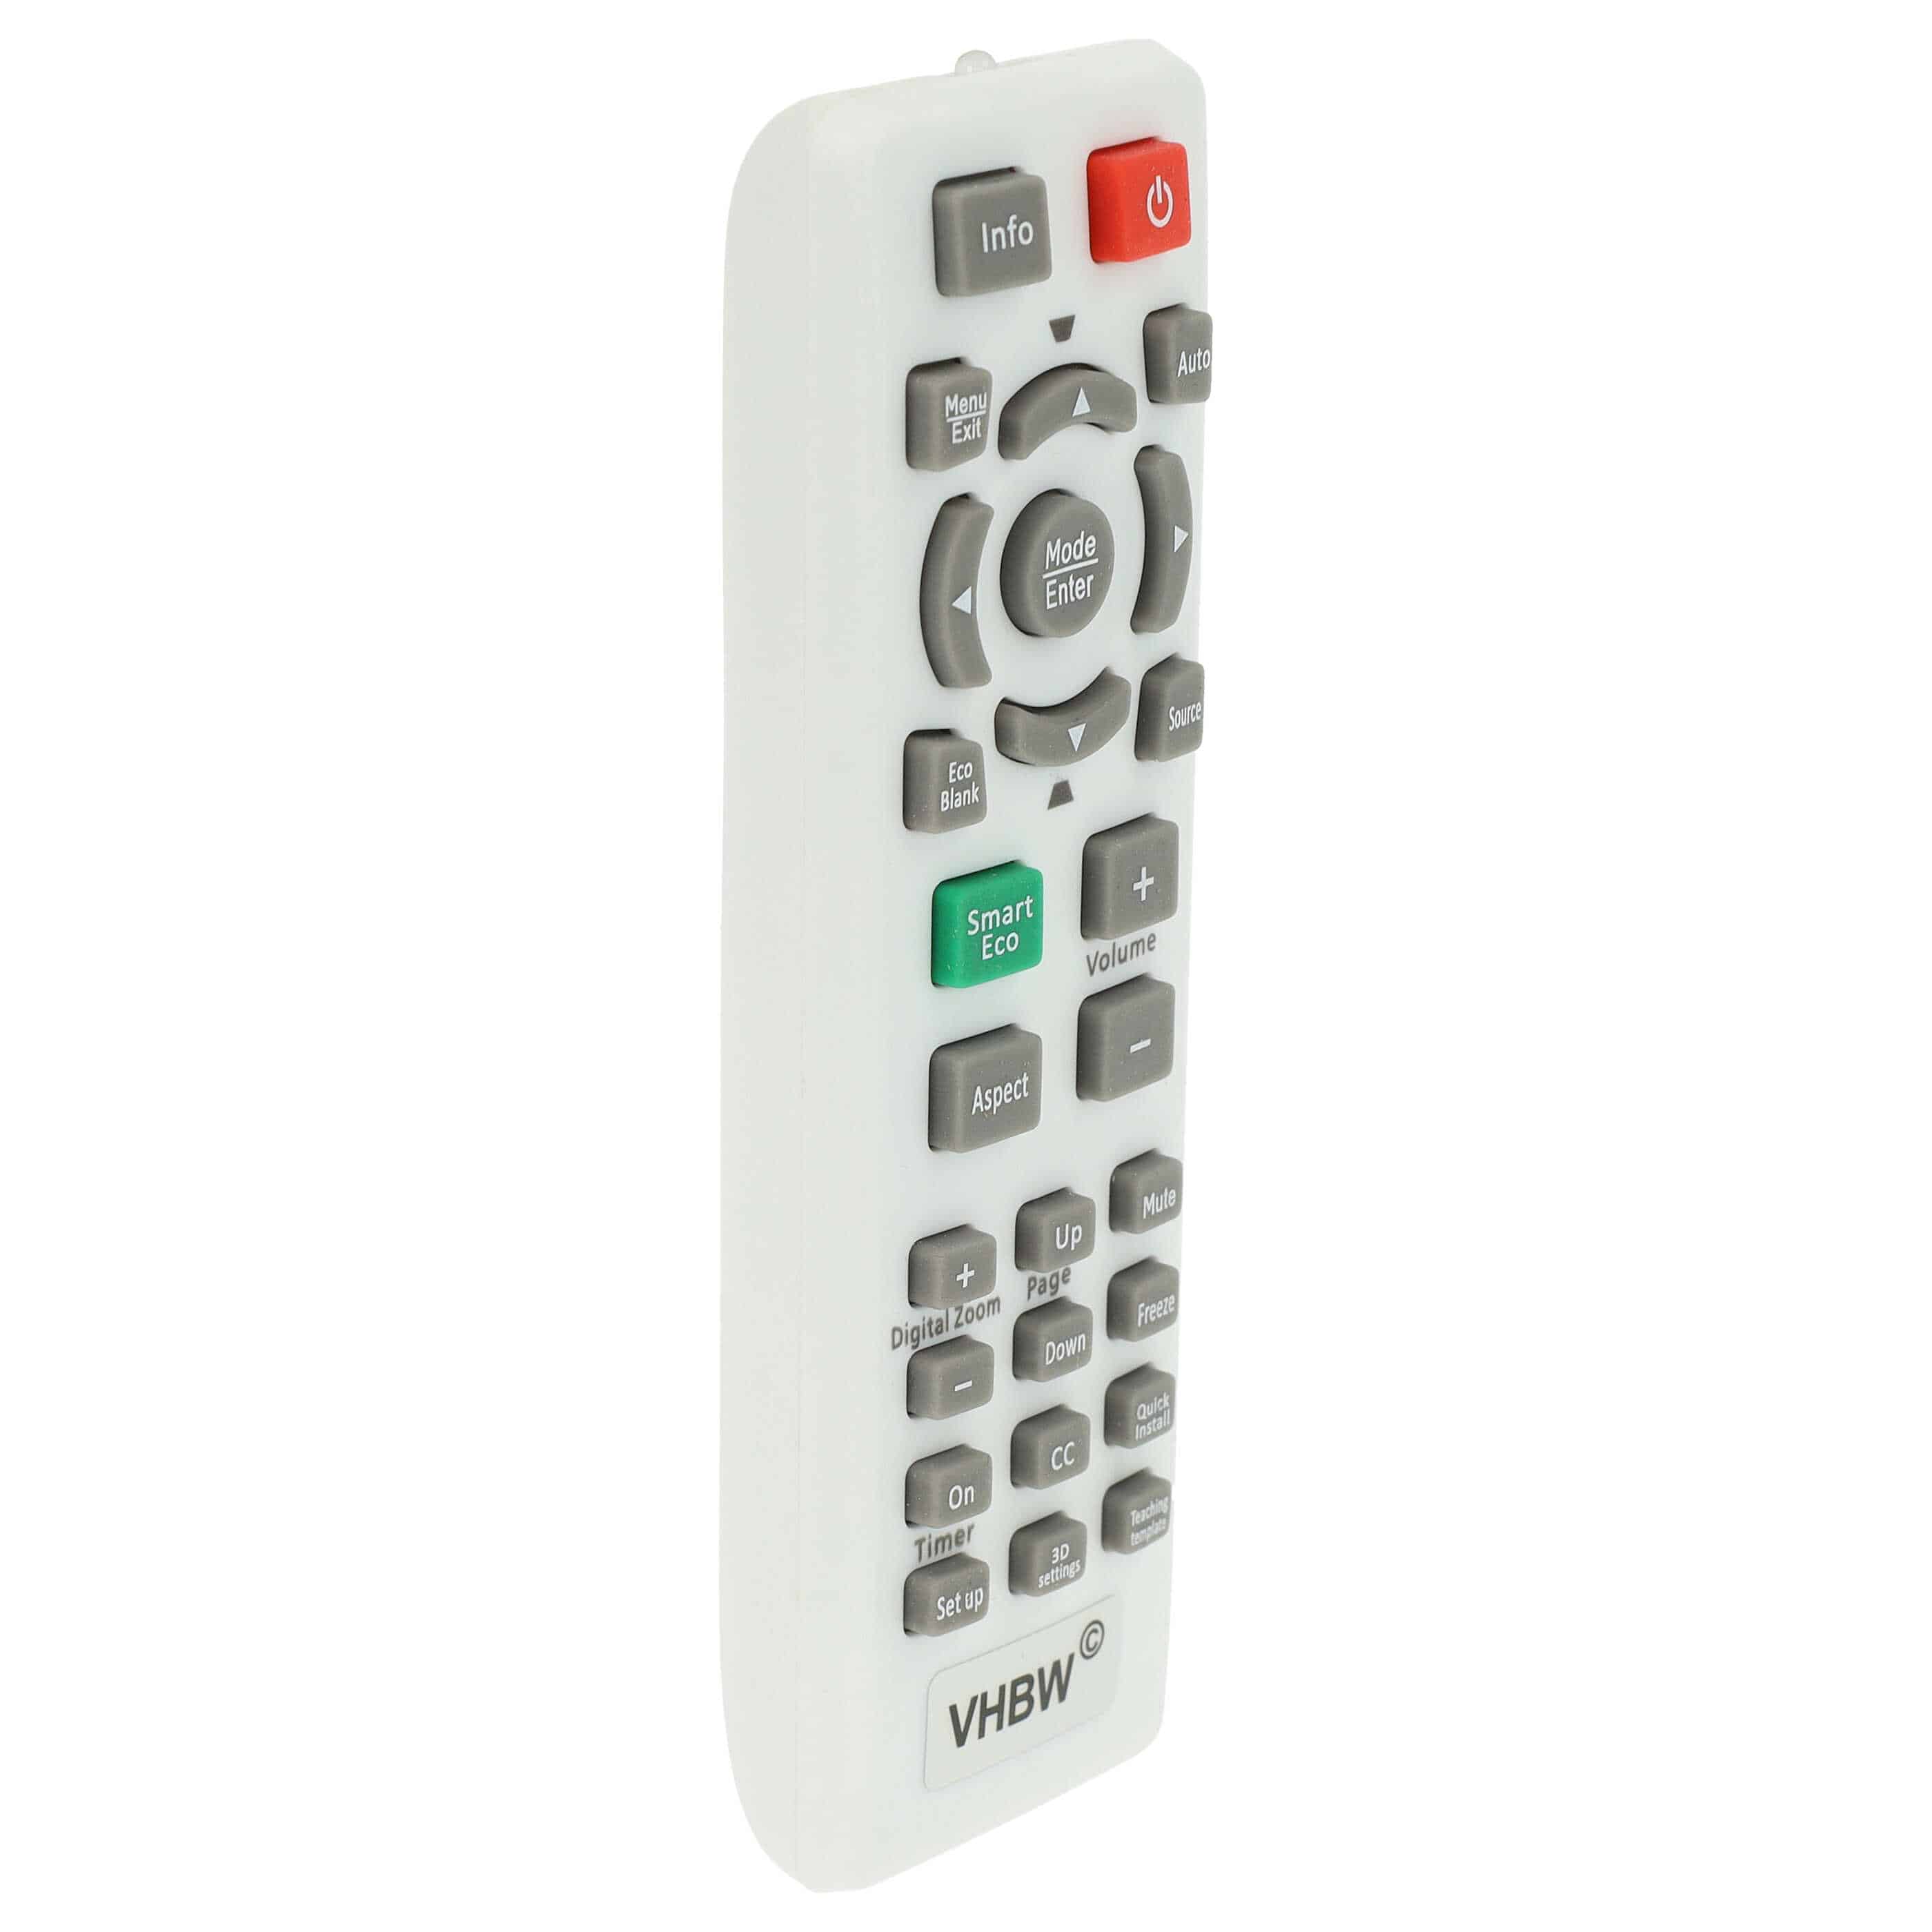 Remote Control replaces BenQ RCX013, RCX022, RC02, RCE012 for BenQ Projector